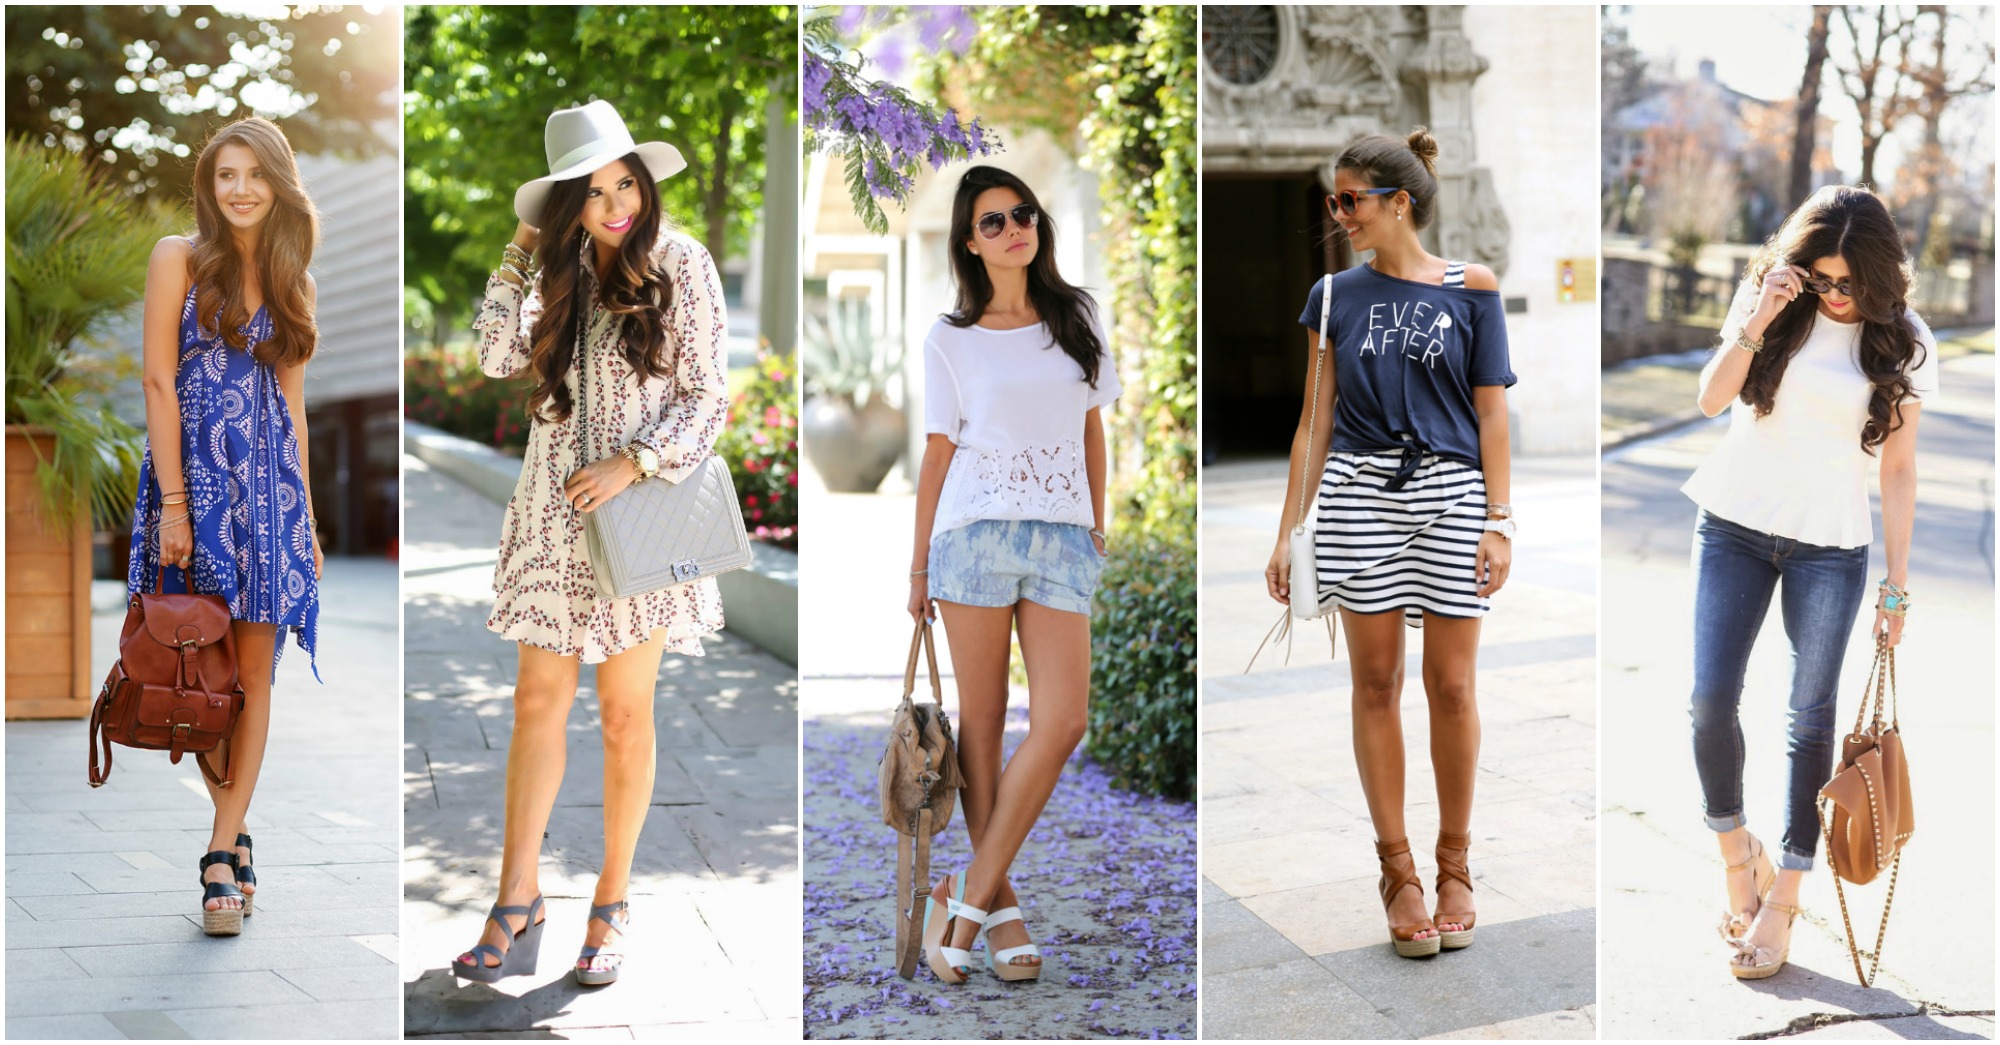 Summer Outfits With Wedge Sandals You Will Love To Copy - fashionsy.com